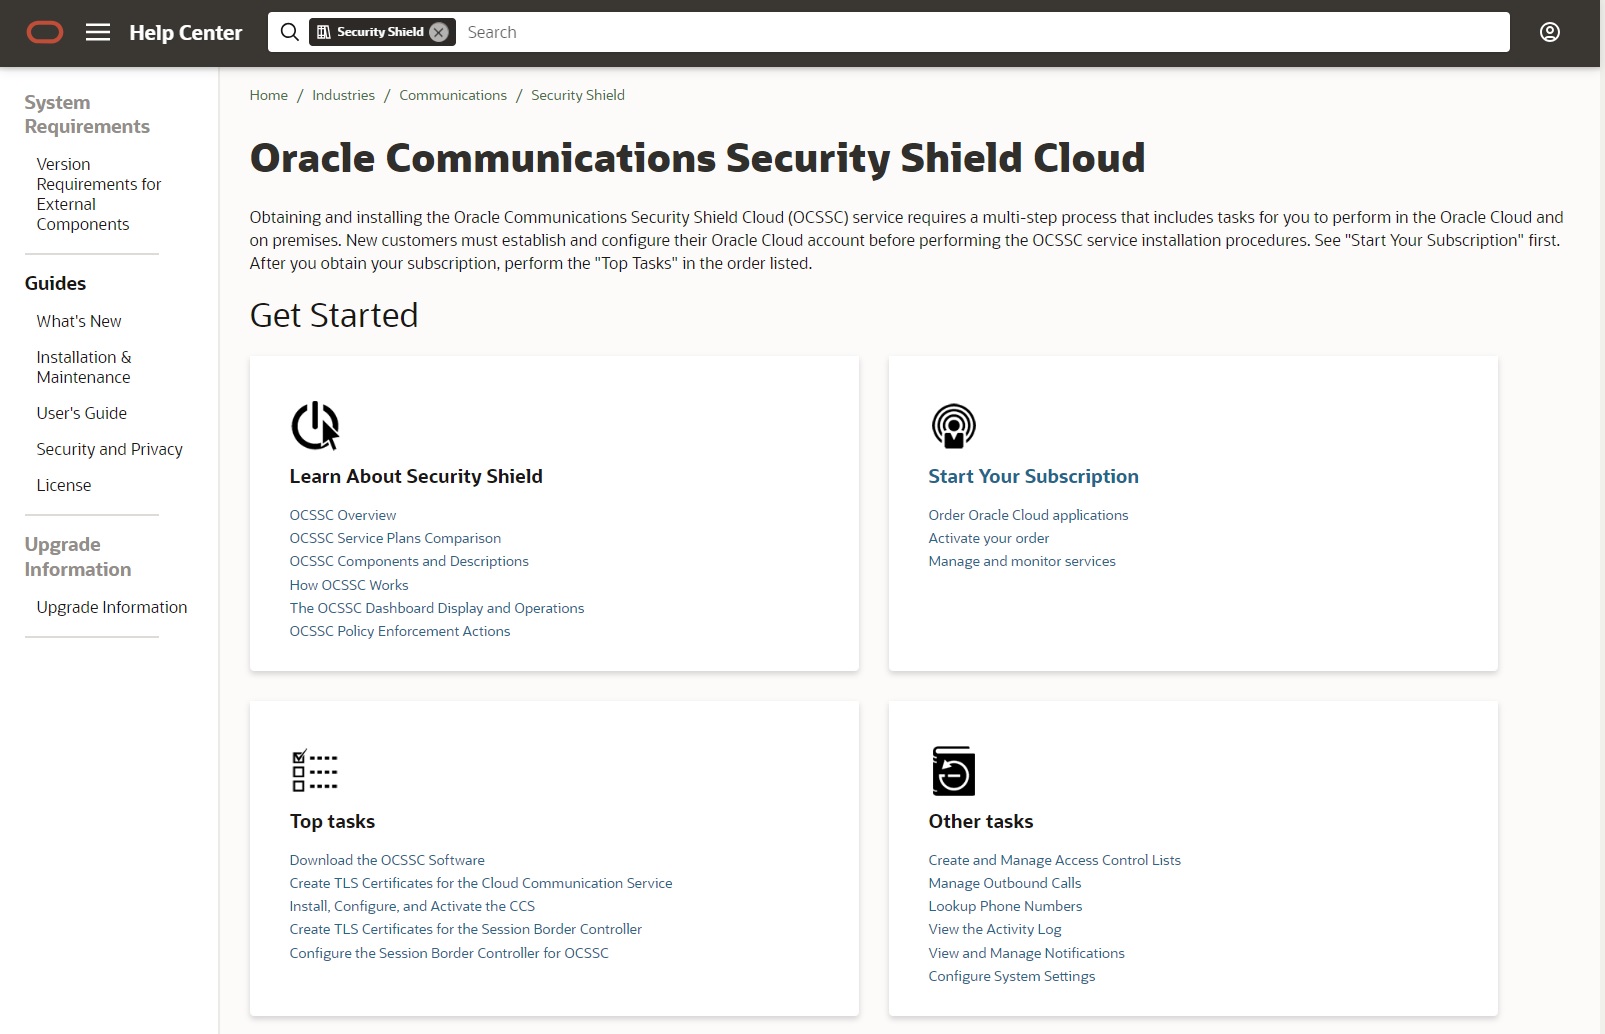 This screen capture shows the Help Center landing page for Security Shield documentation.